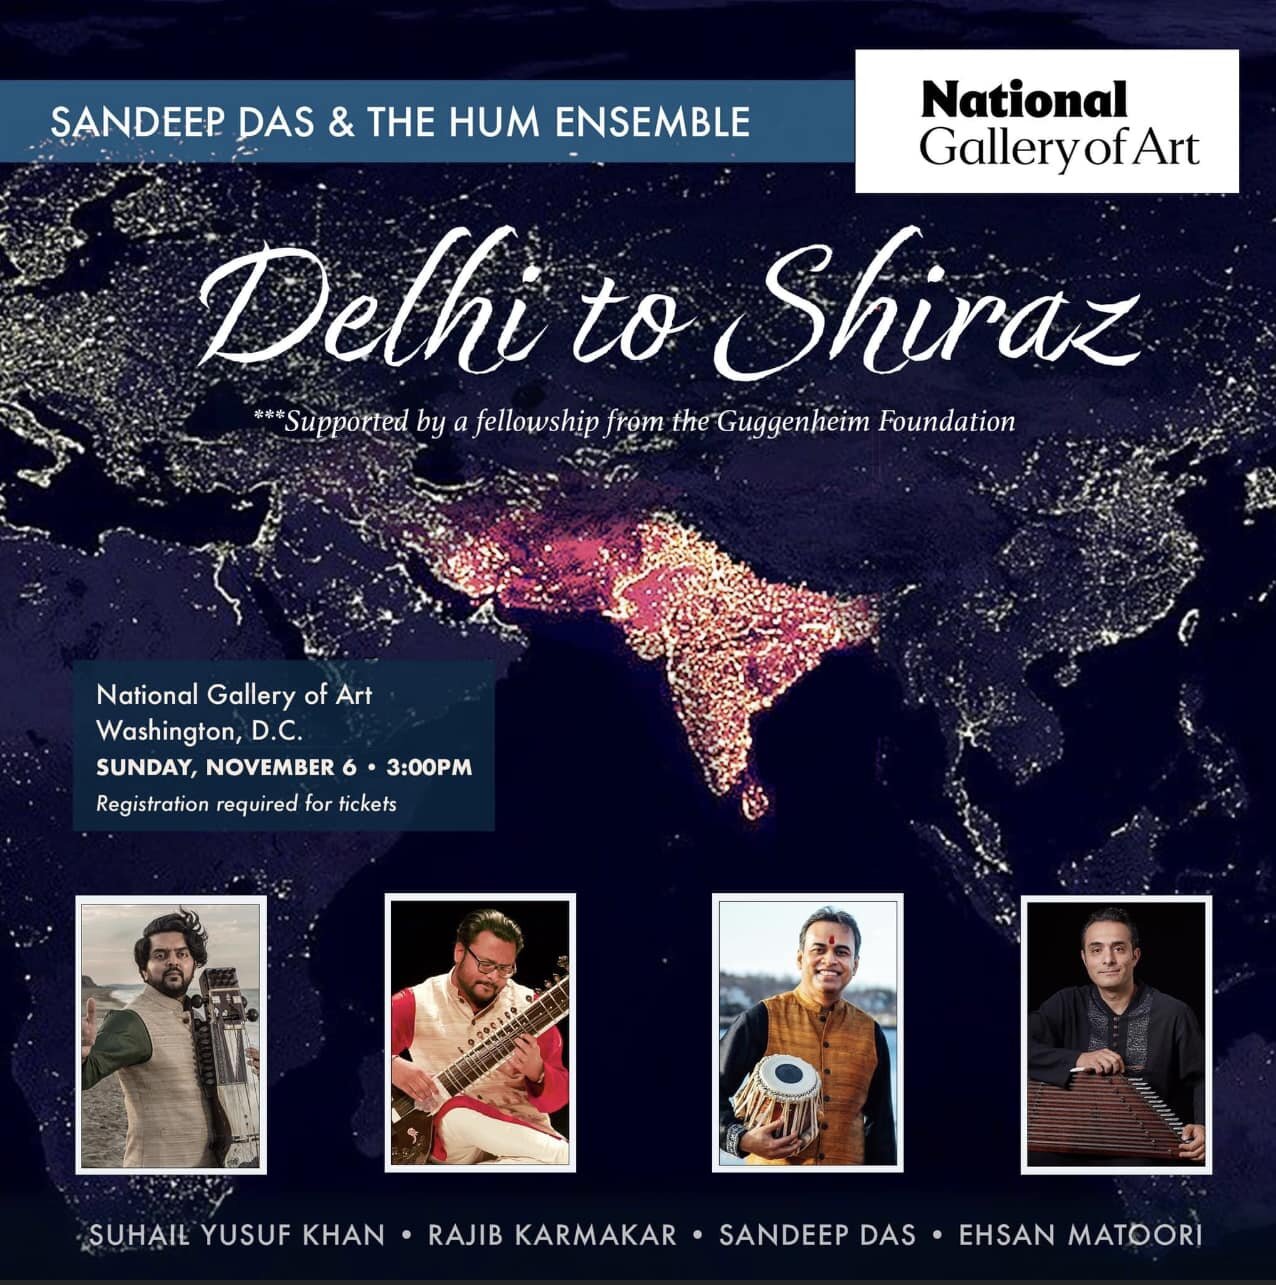 Traveling to Washington D.C. for concert at National Gallery of Art with Official: Sandeep Das, Ehsan Matoori and Suhail Yusuf Khan. 
Looking forward to seeing you all !!!